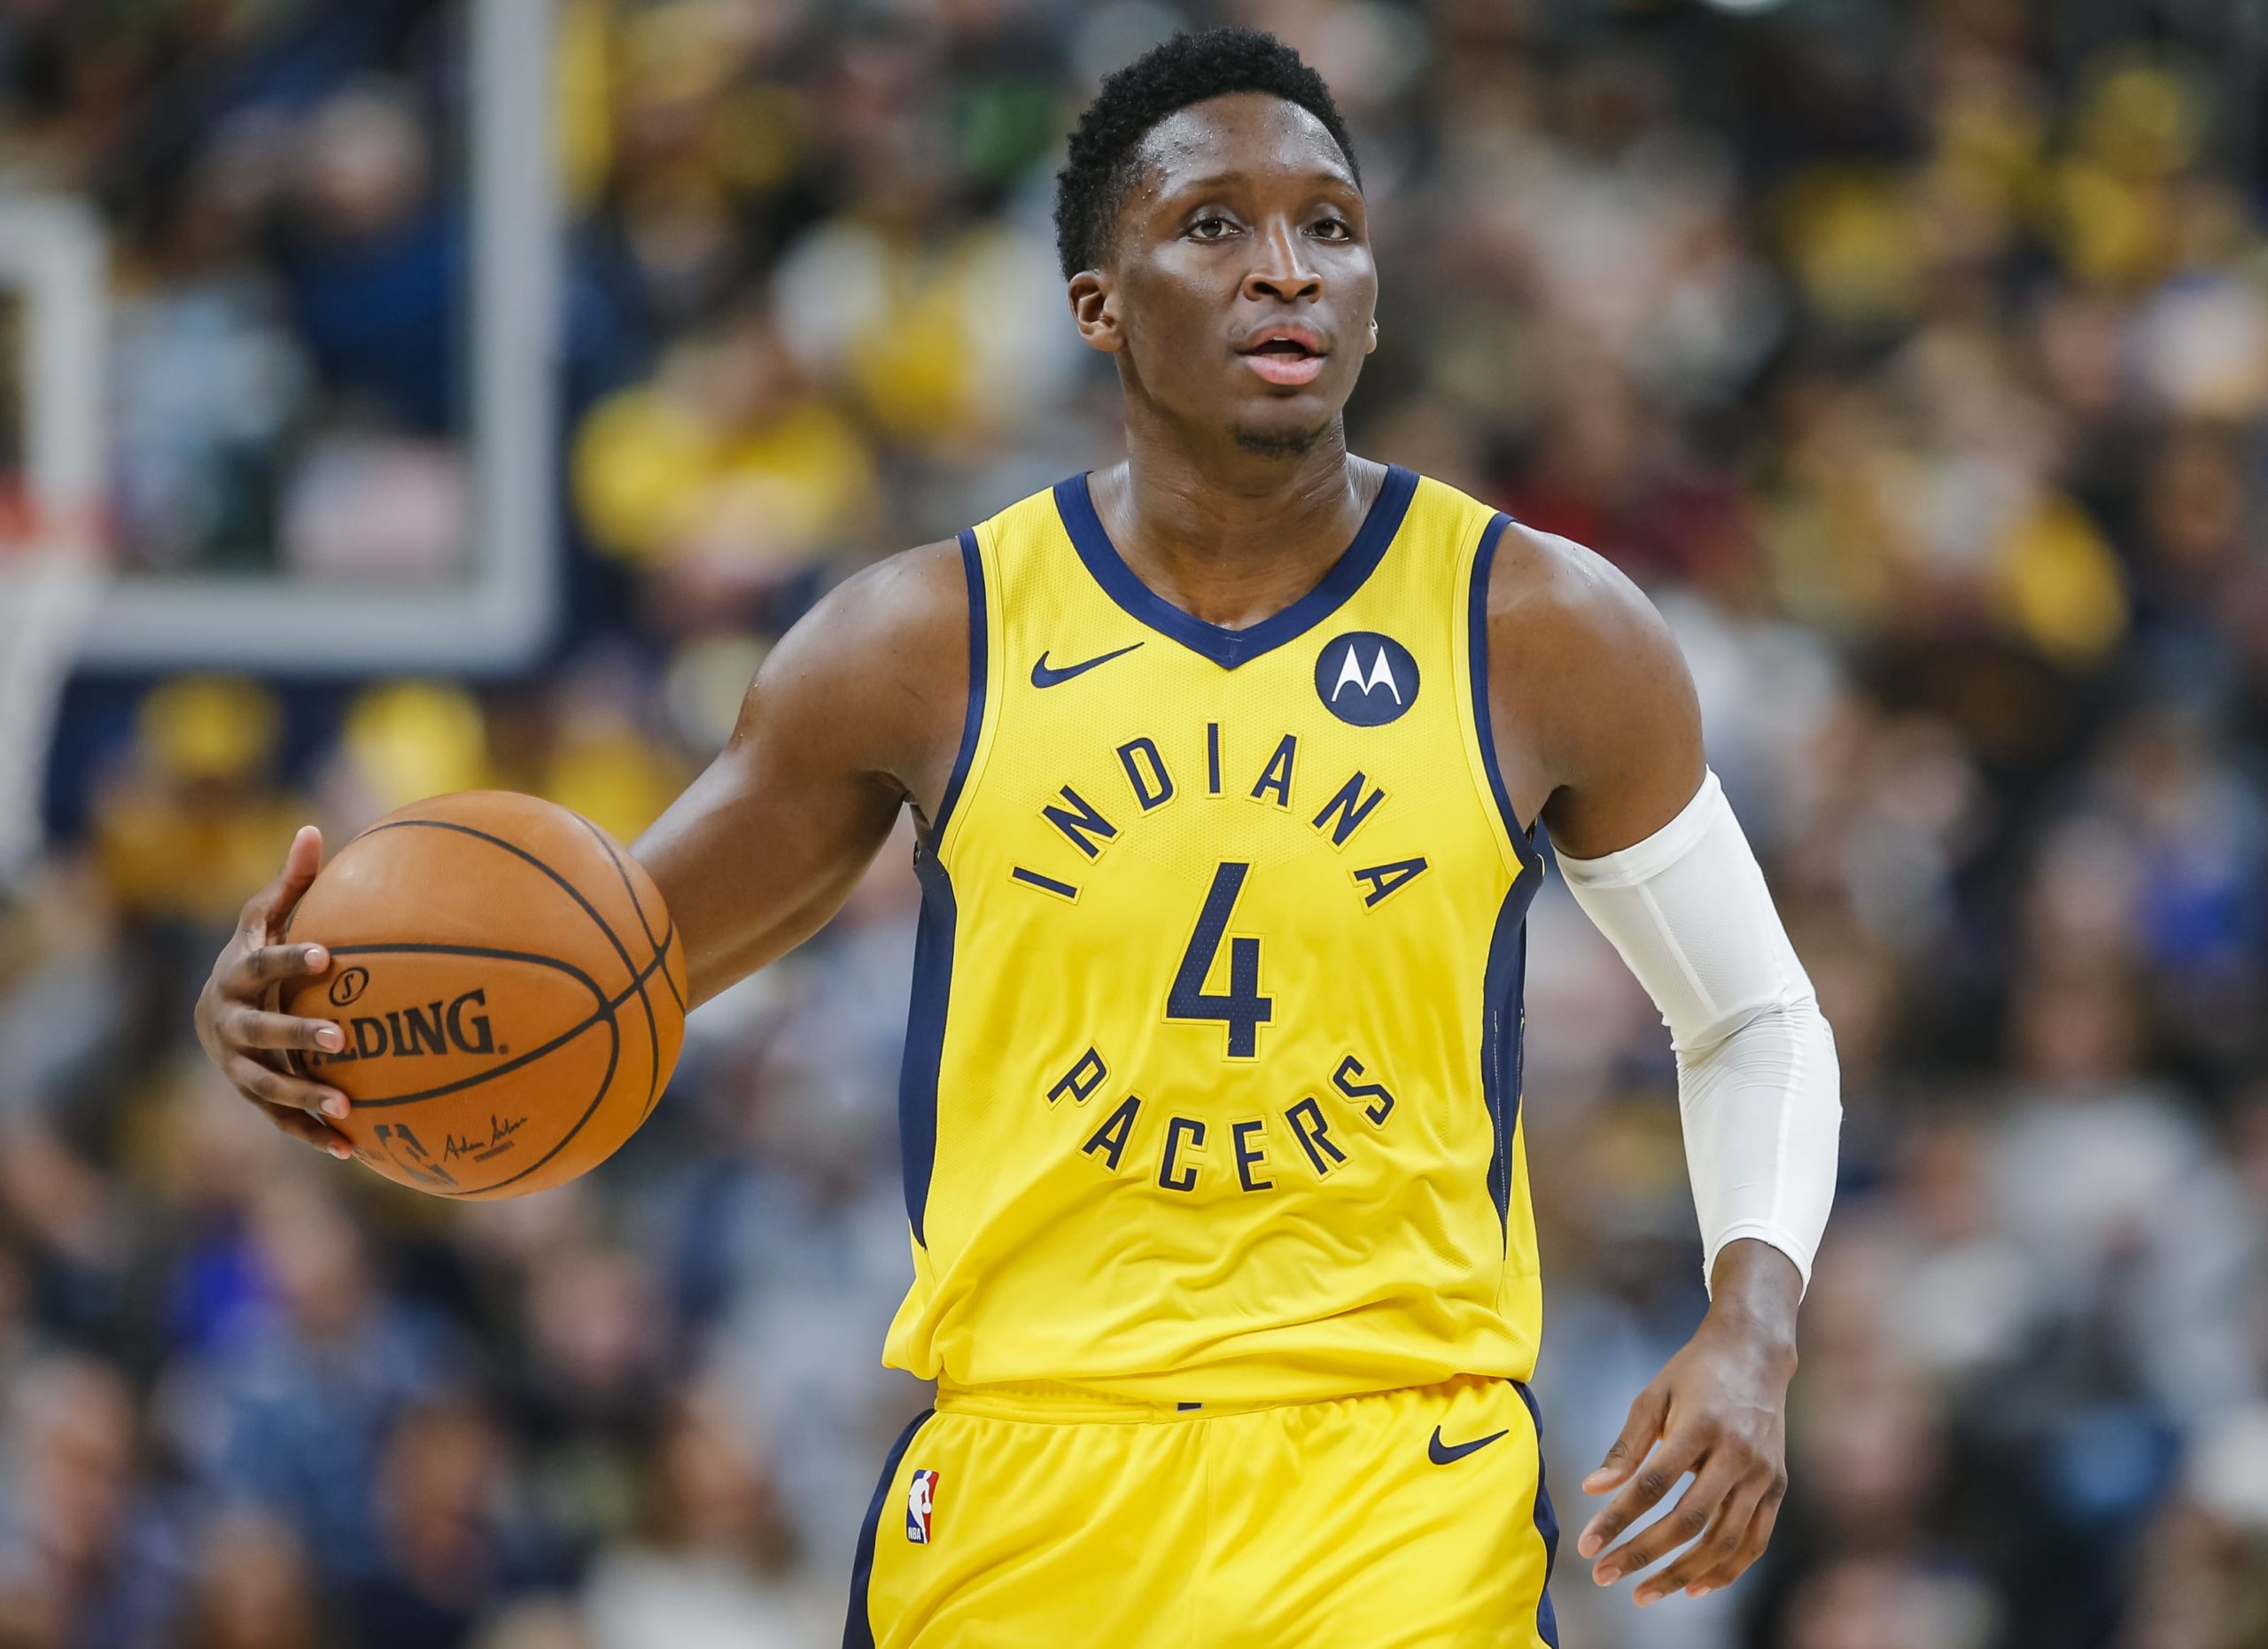 What Ethnicity is Victor Oladipo?